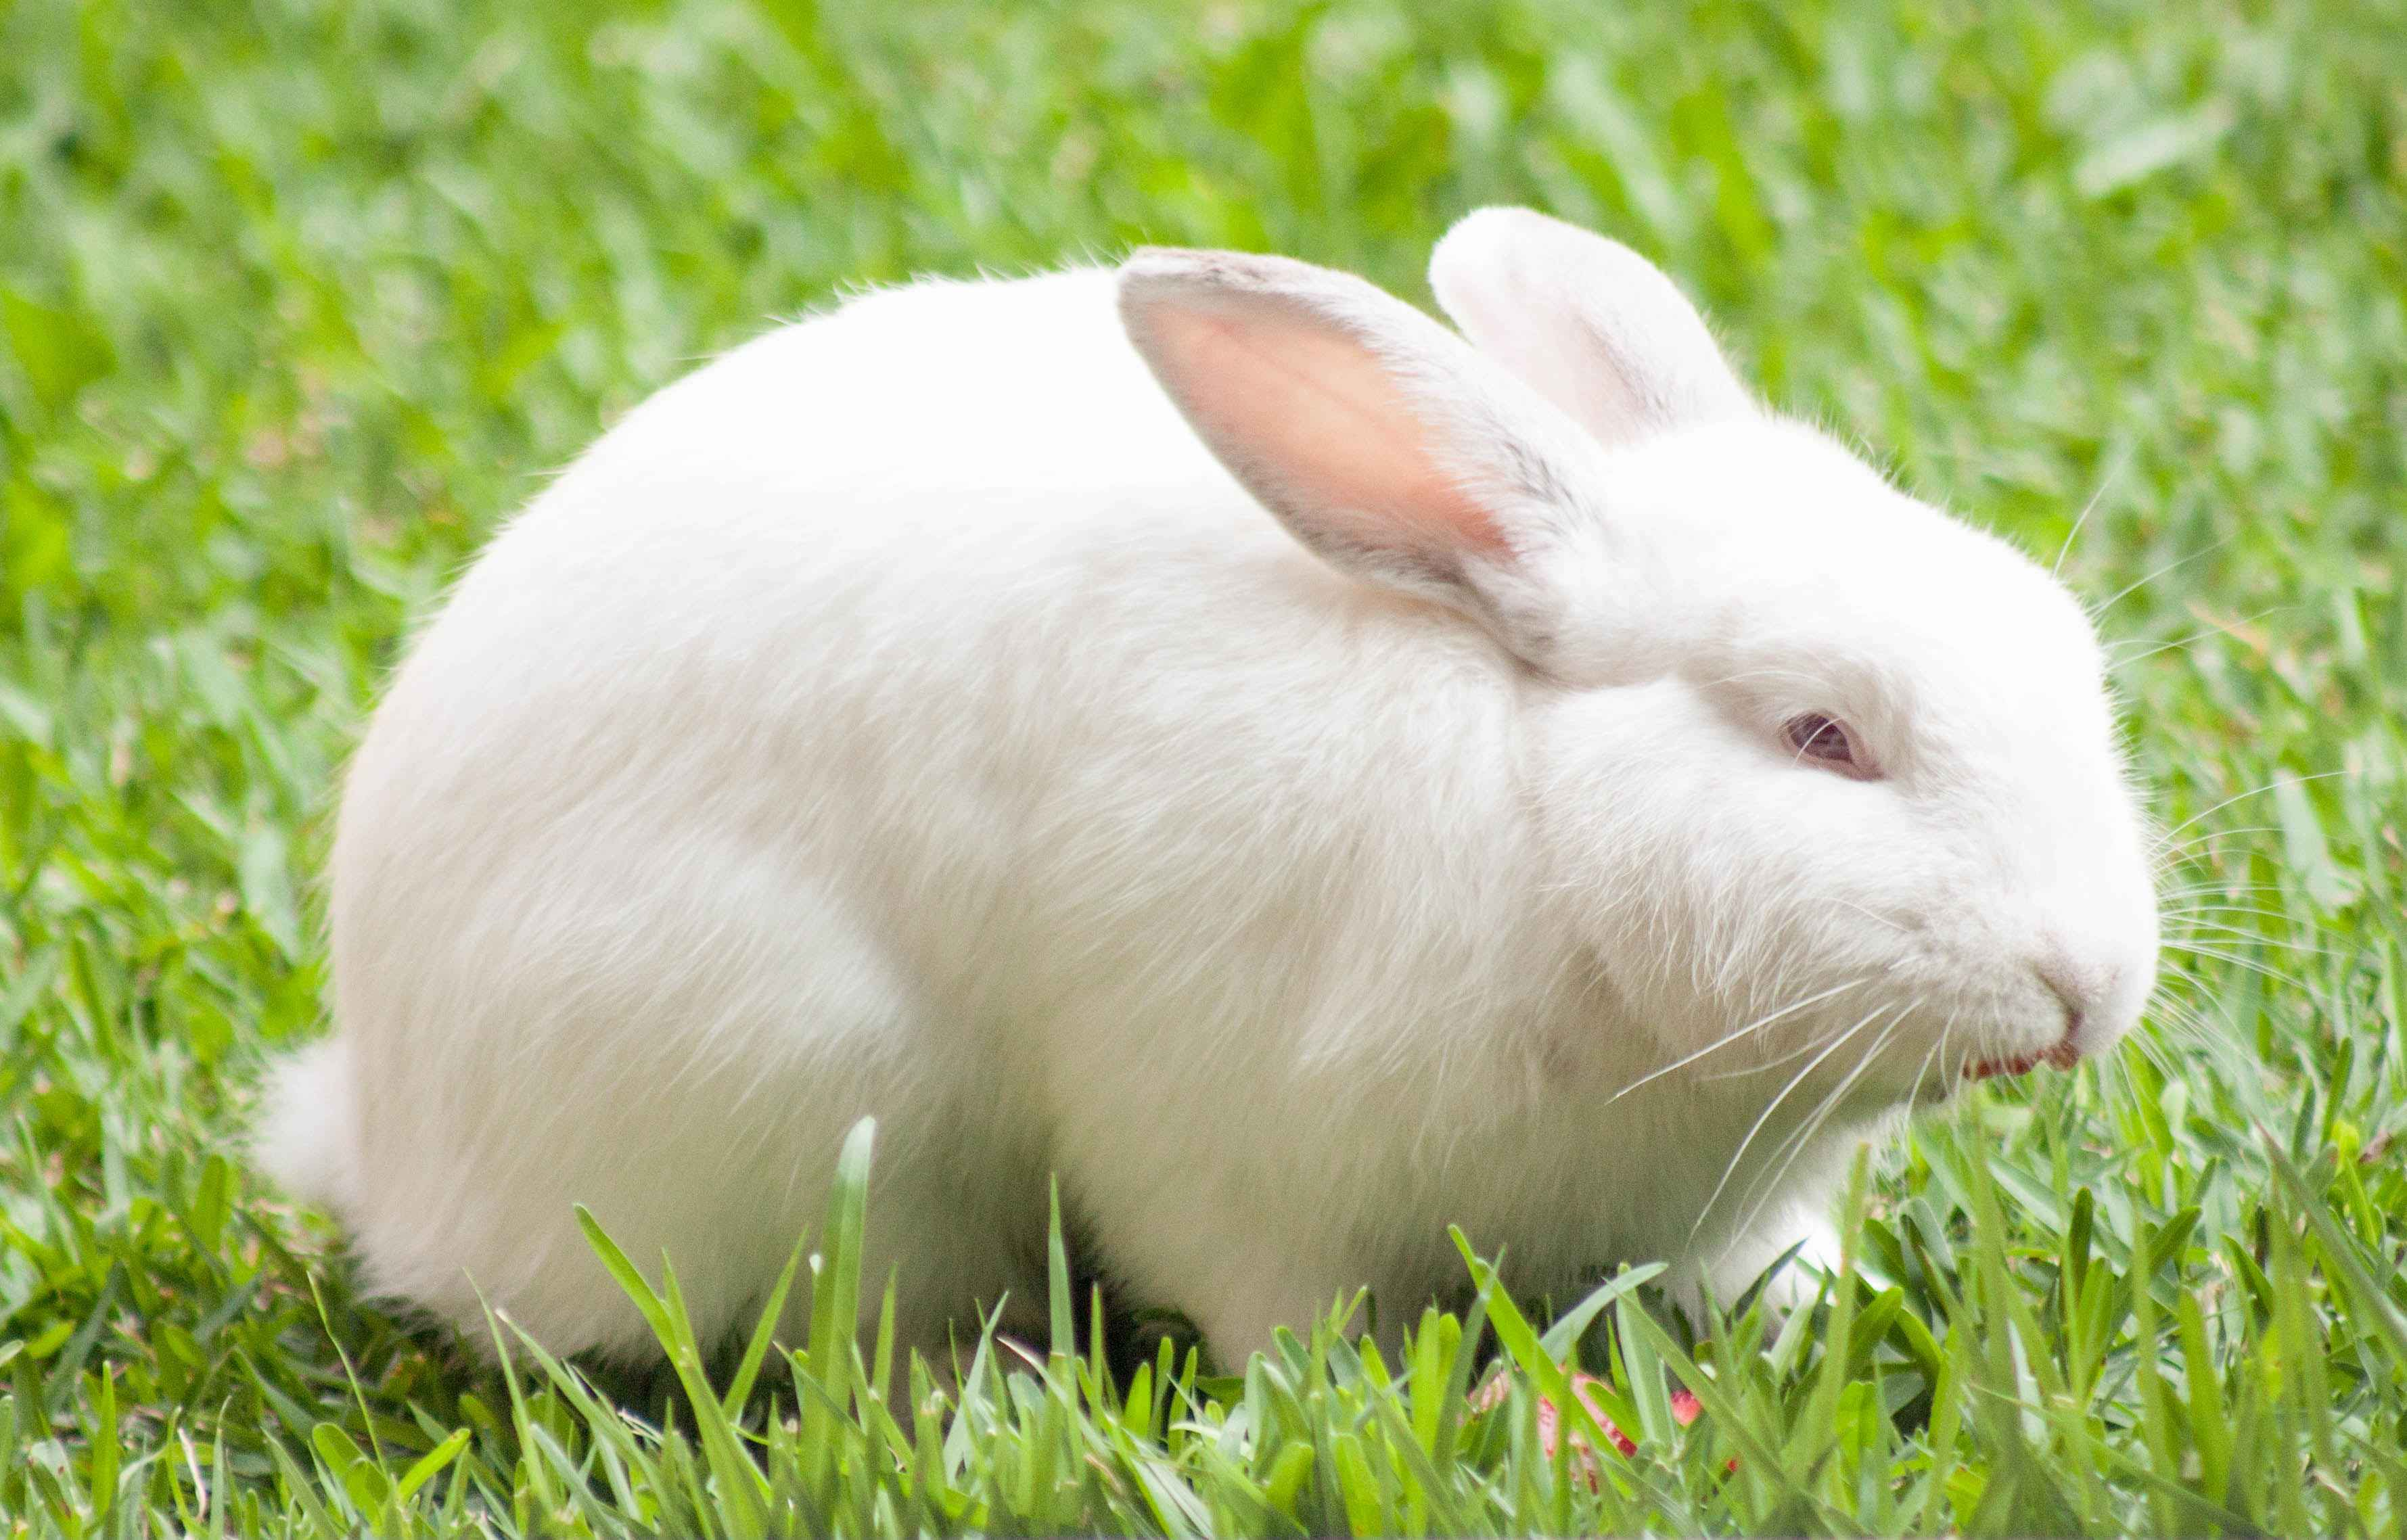 Signs of Liver Failure in Rabbits: How to Spot the Symptoms